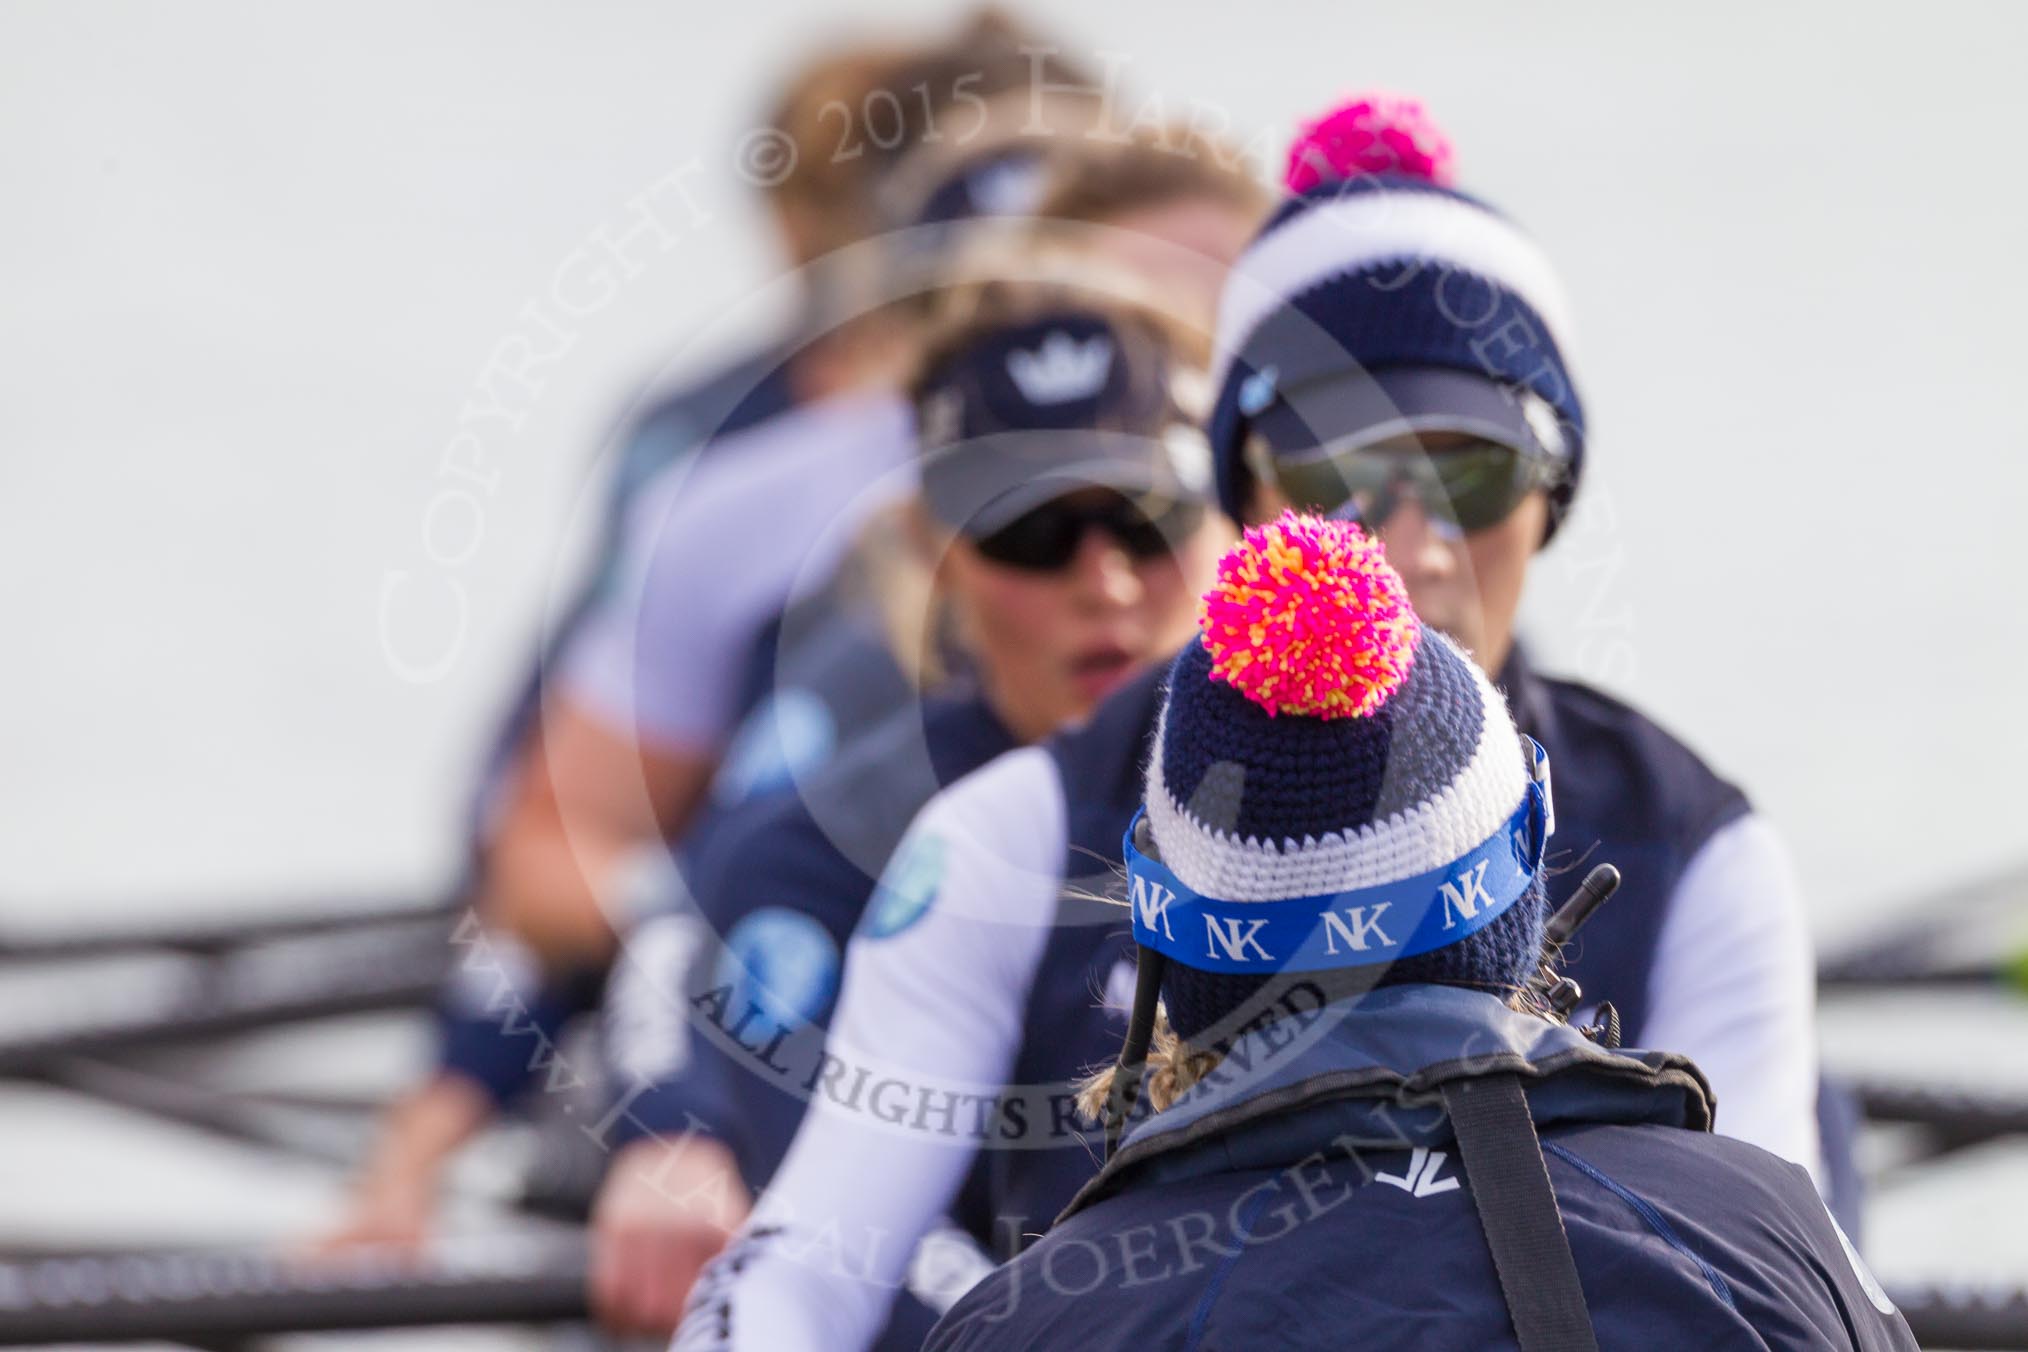 The Boat Race season 2015: OUWBC training Wallingford.

Wallingford,

United Kingdom,
on 04 March 2015 at 15:44, image #54